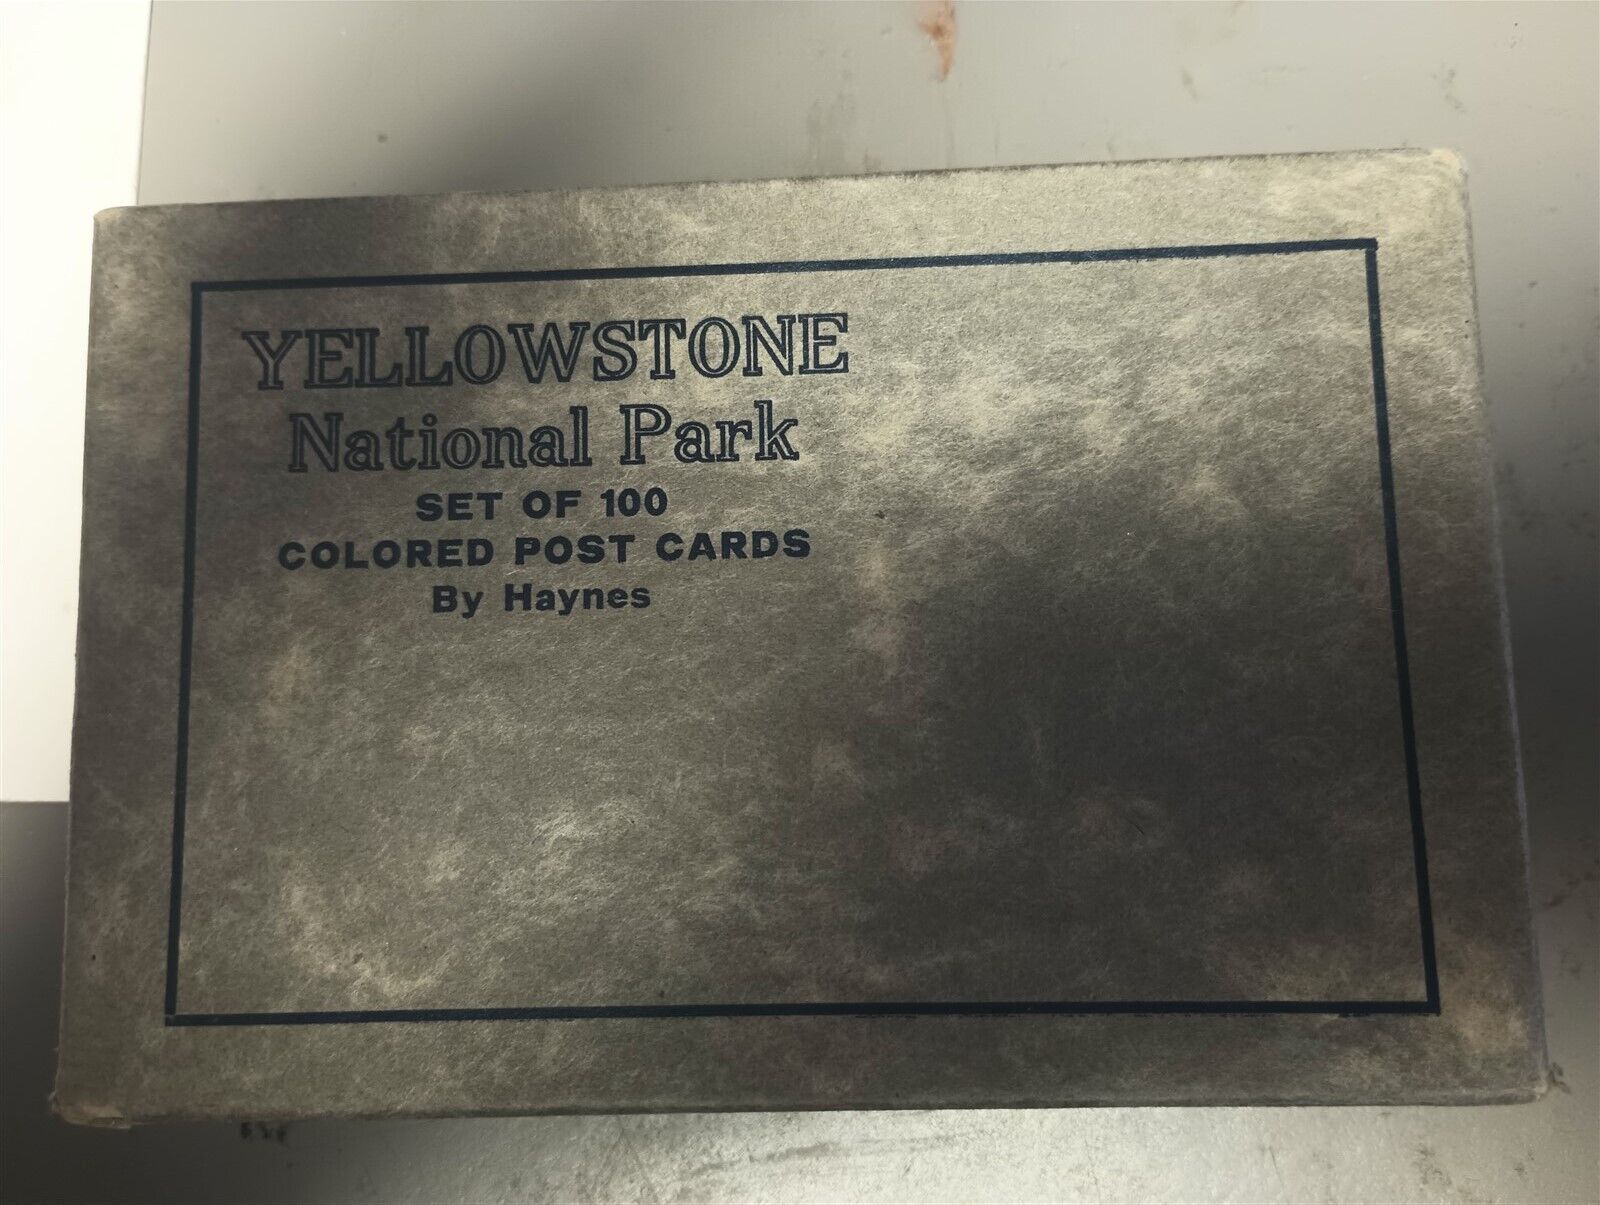 Yellowstone National Park Set of 100 Colored Post Cards by Haynes